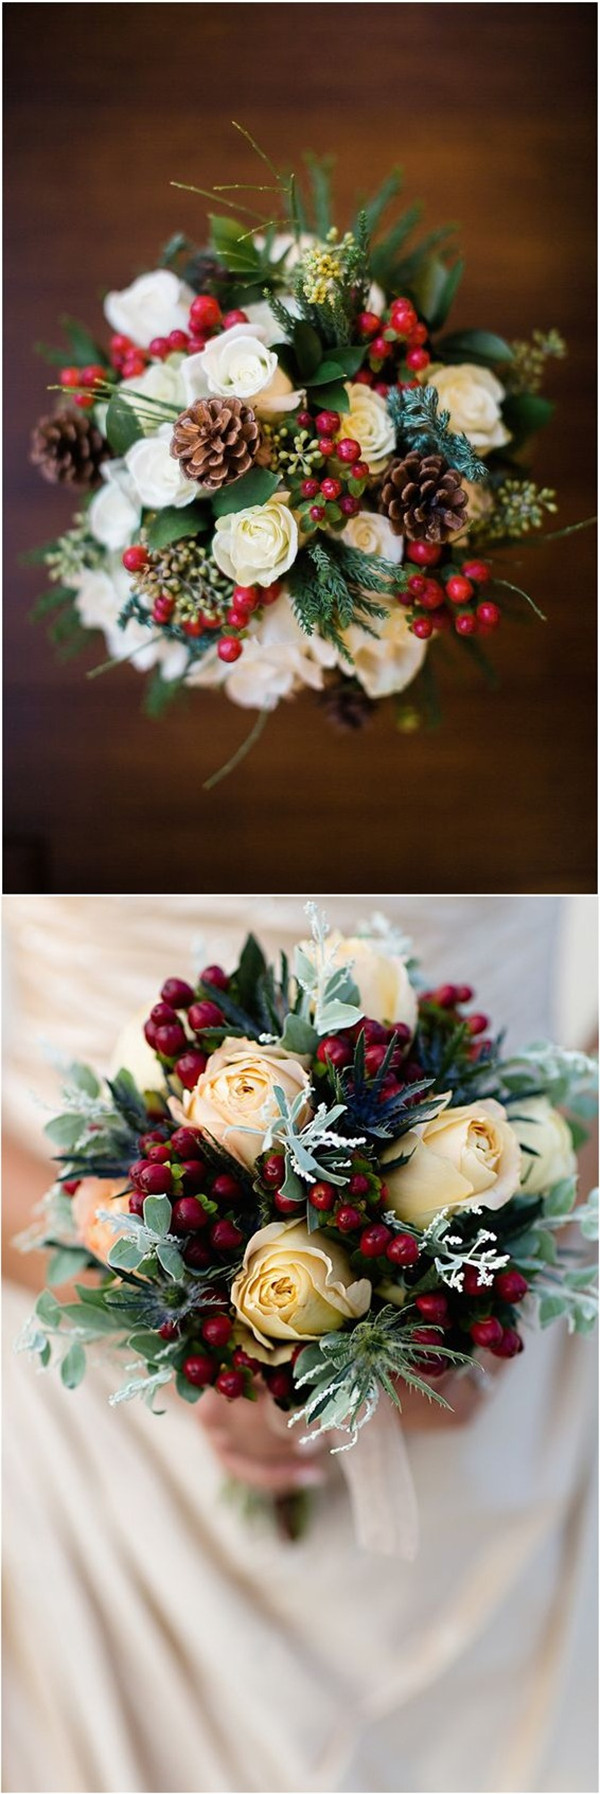 Berries and Pinecone Christmas Wedding Bouquet